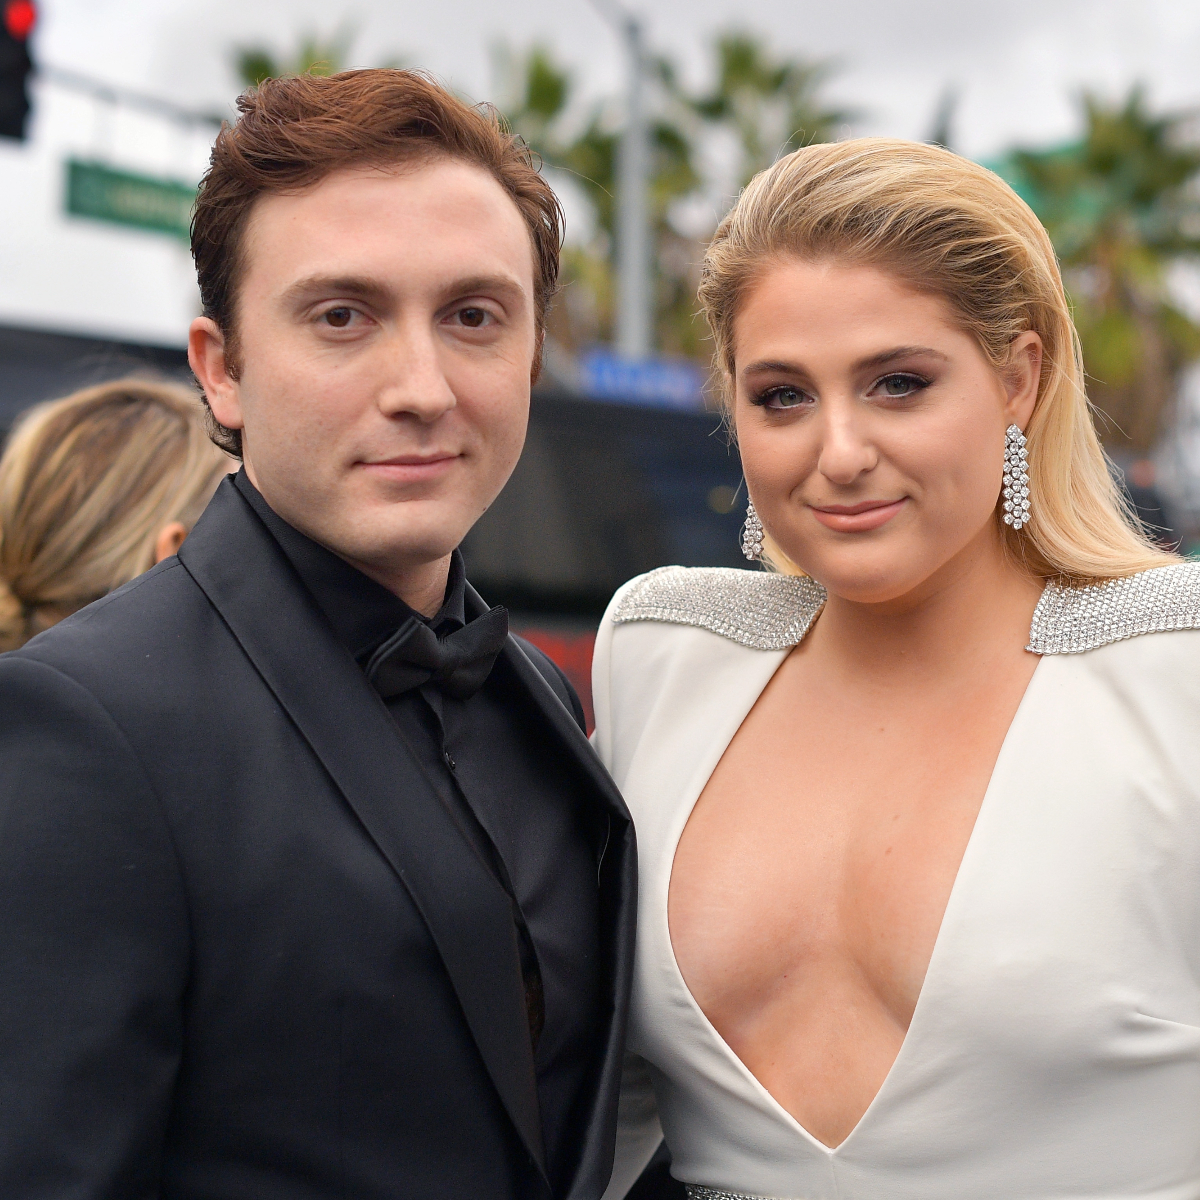 Meghan Trainor recently revealed a personal detail about her marriage to Daryl Sabara